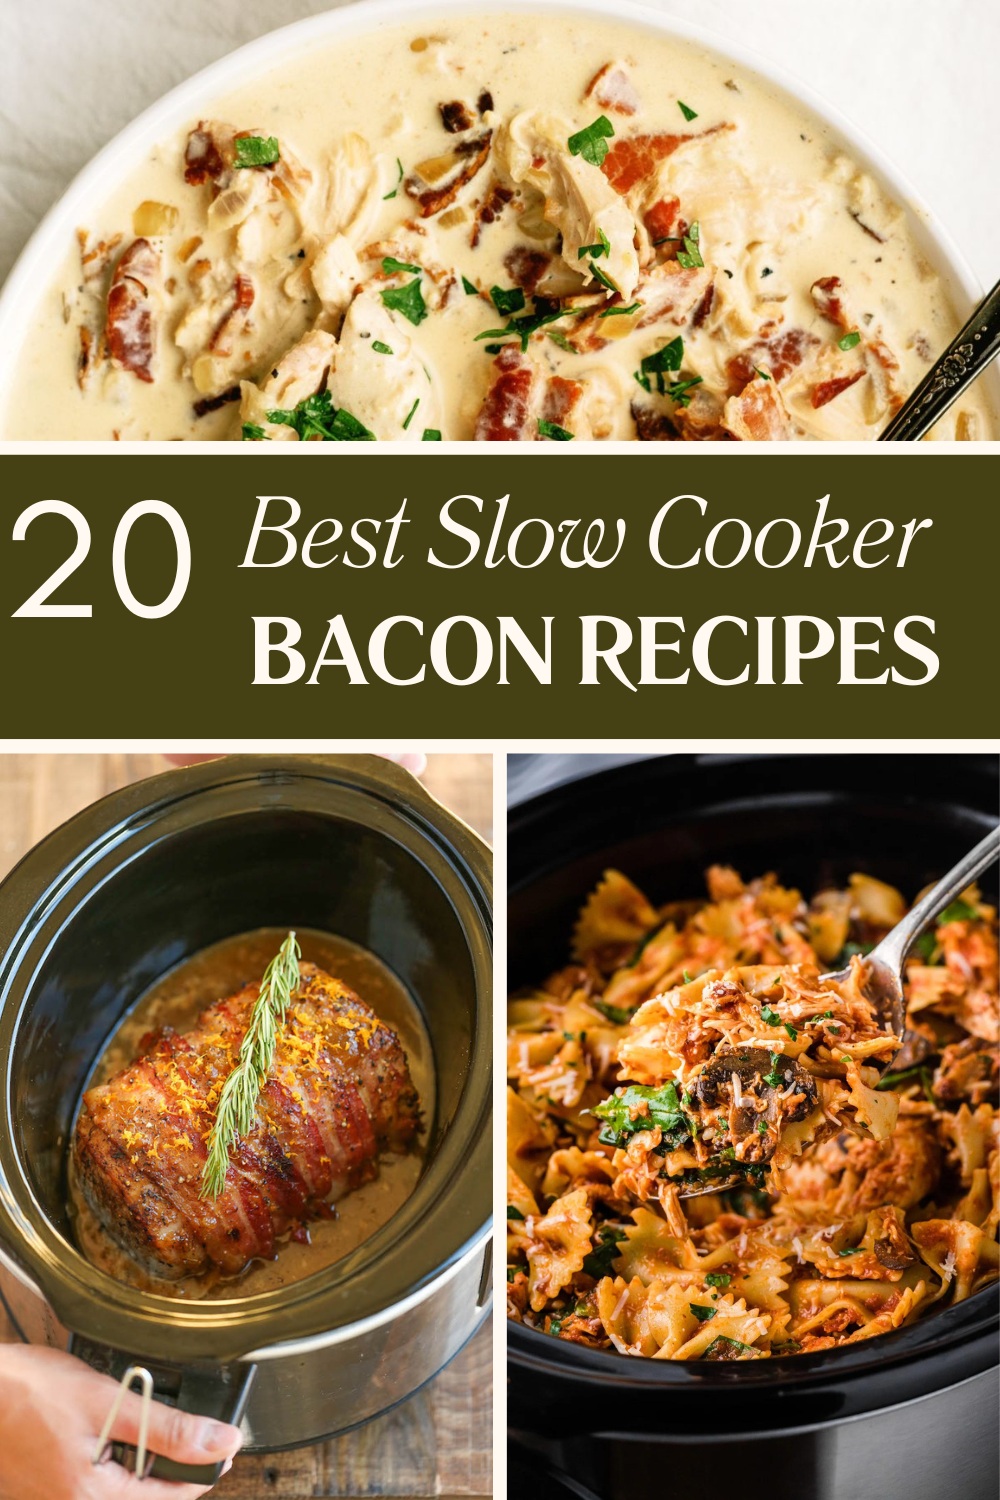 20 Best Slow Cooker Bacon Recipes